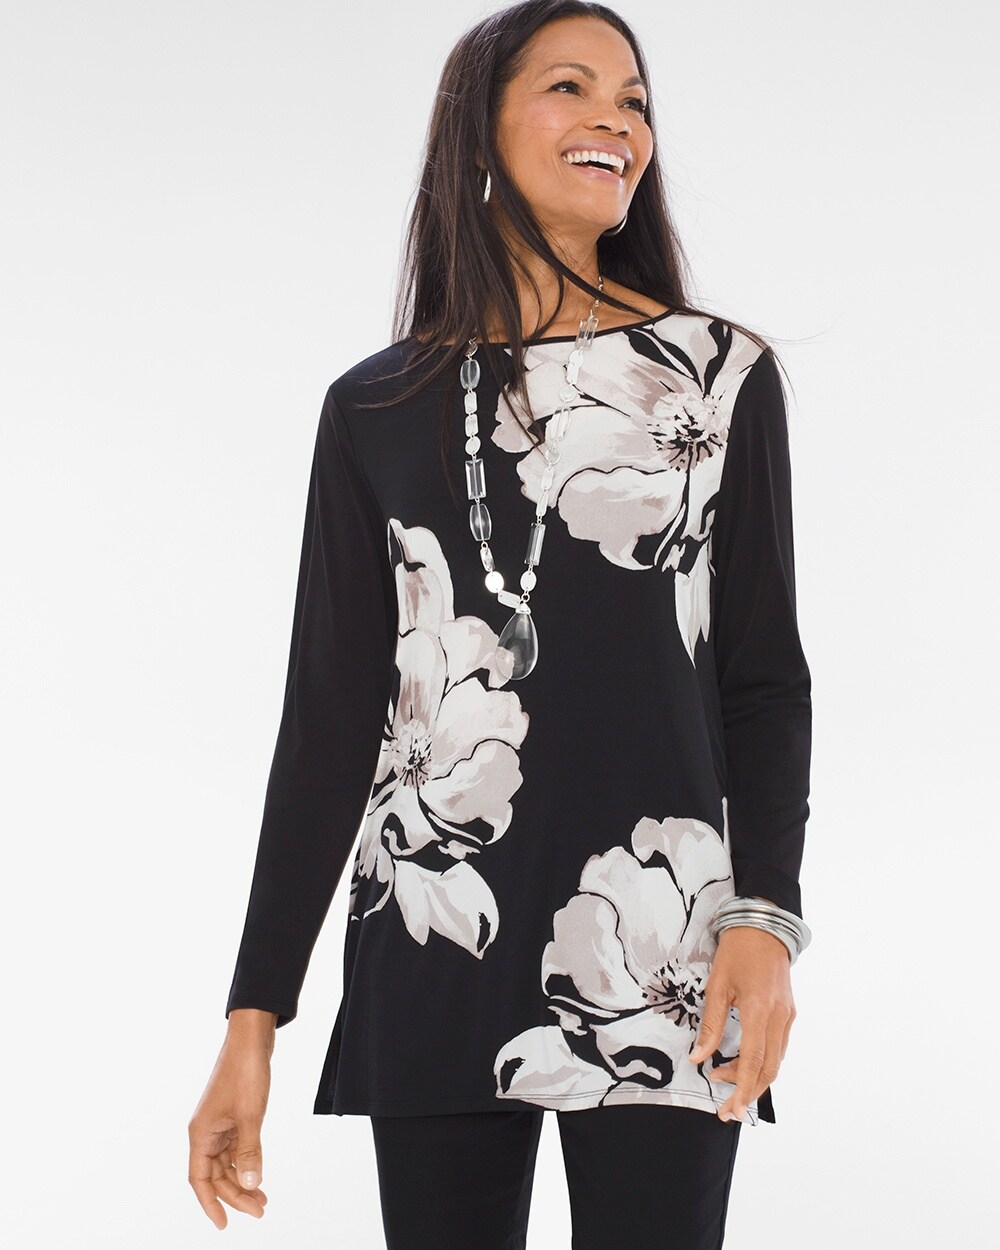 Stamped Blooms Tunic